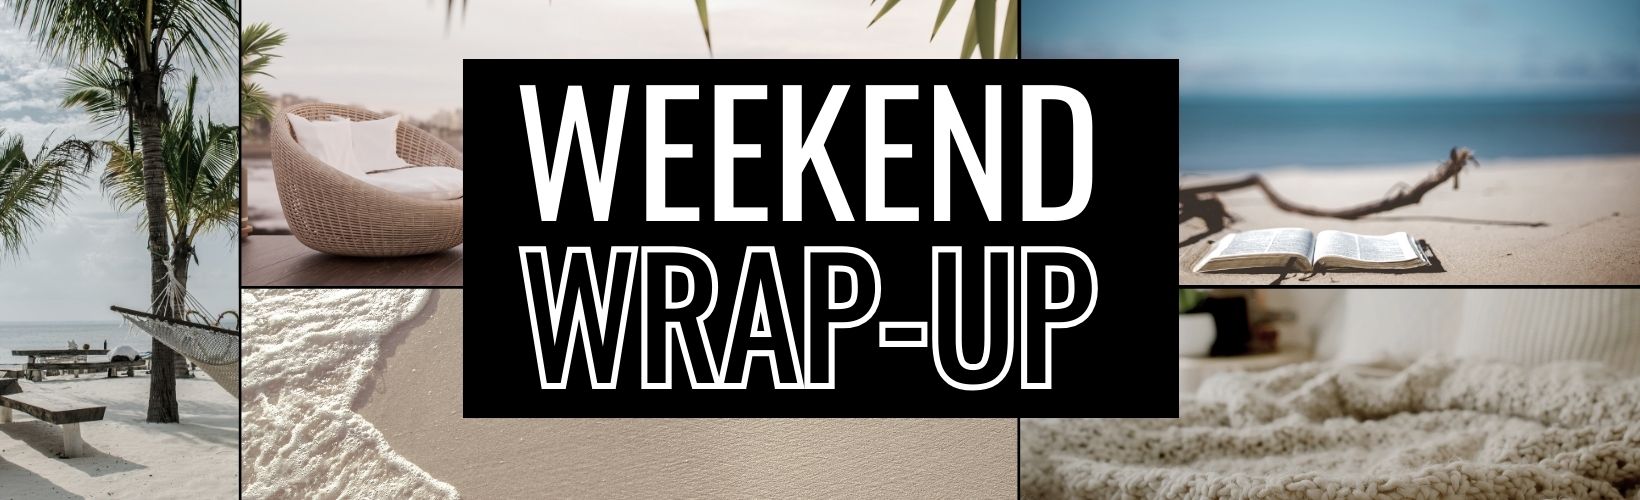 Weekend Wrap-Up: Reflecting on Veterans Day and Our Lives